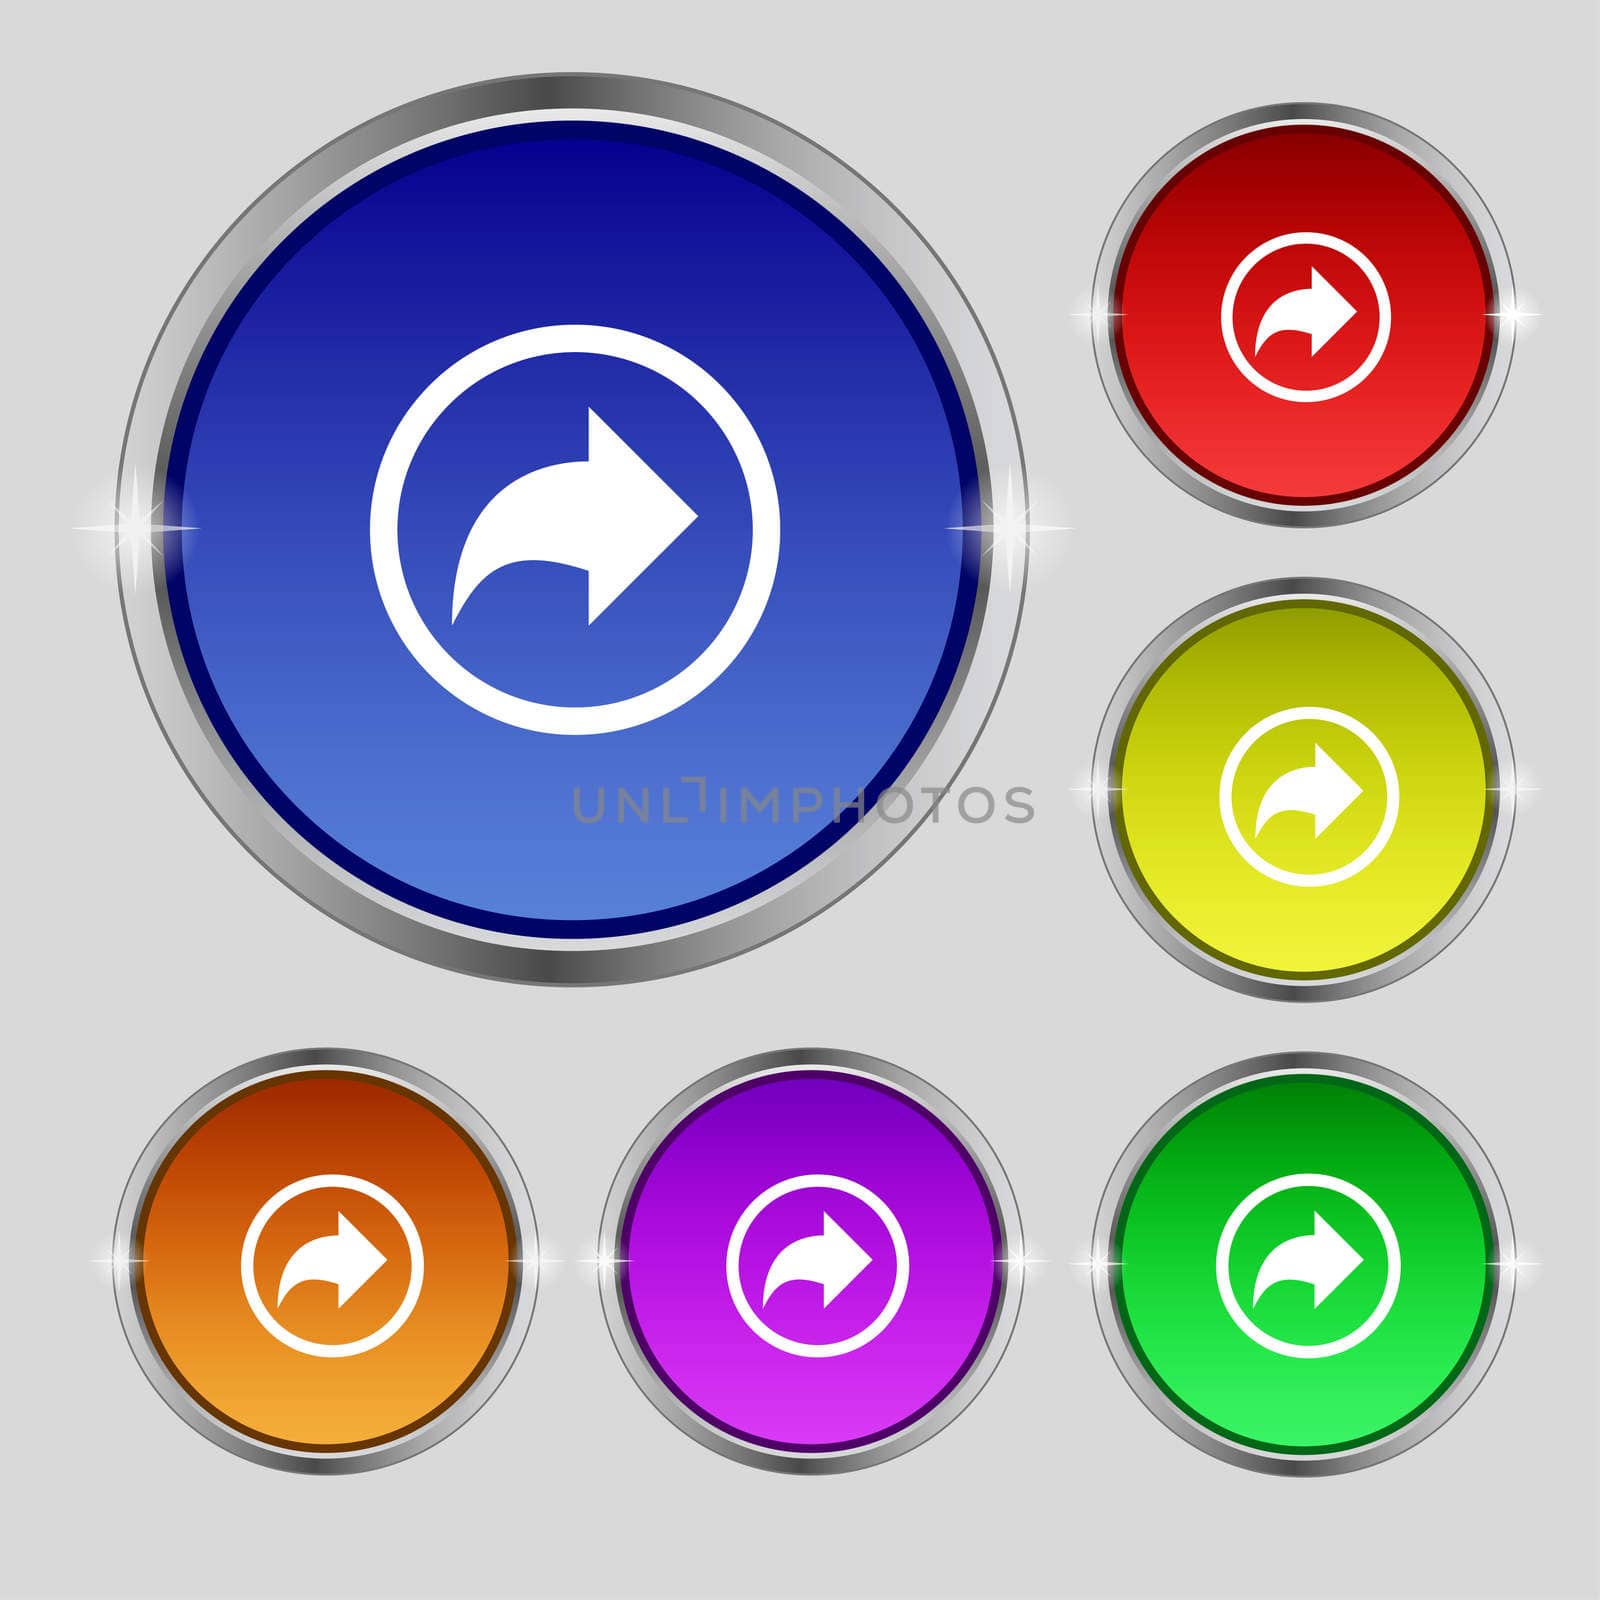 Arrow right, Next icon sign. Round symbol on bright colourful buttons. illustration